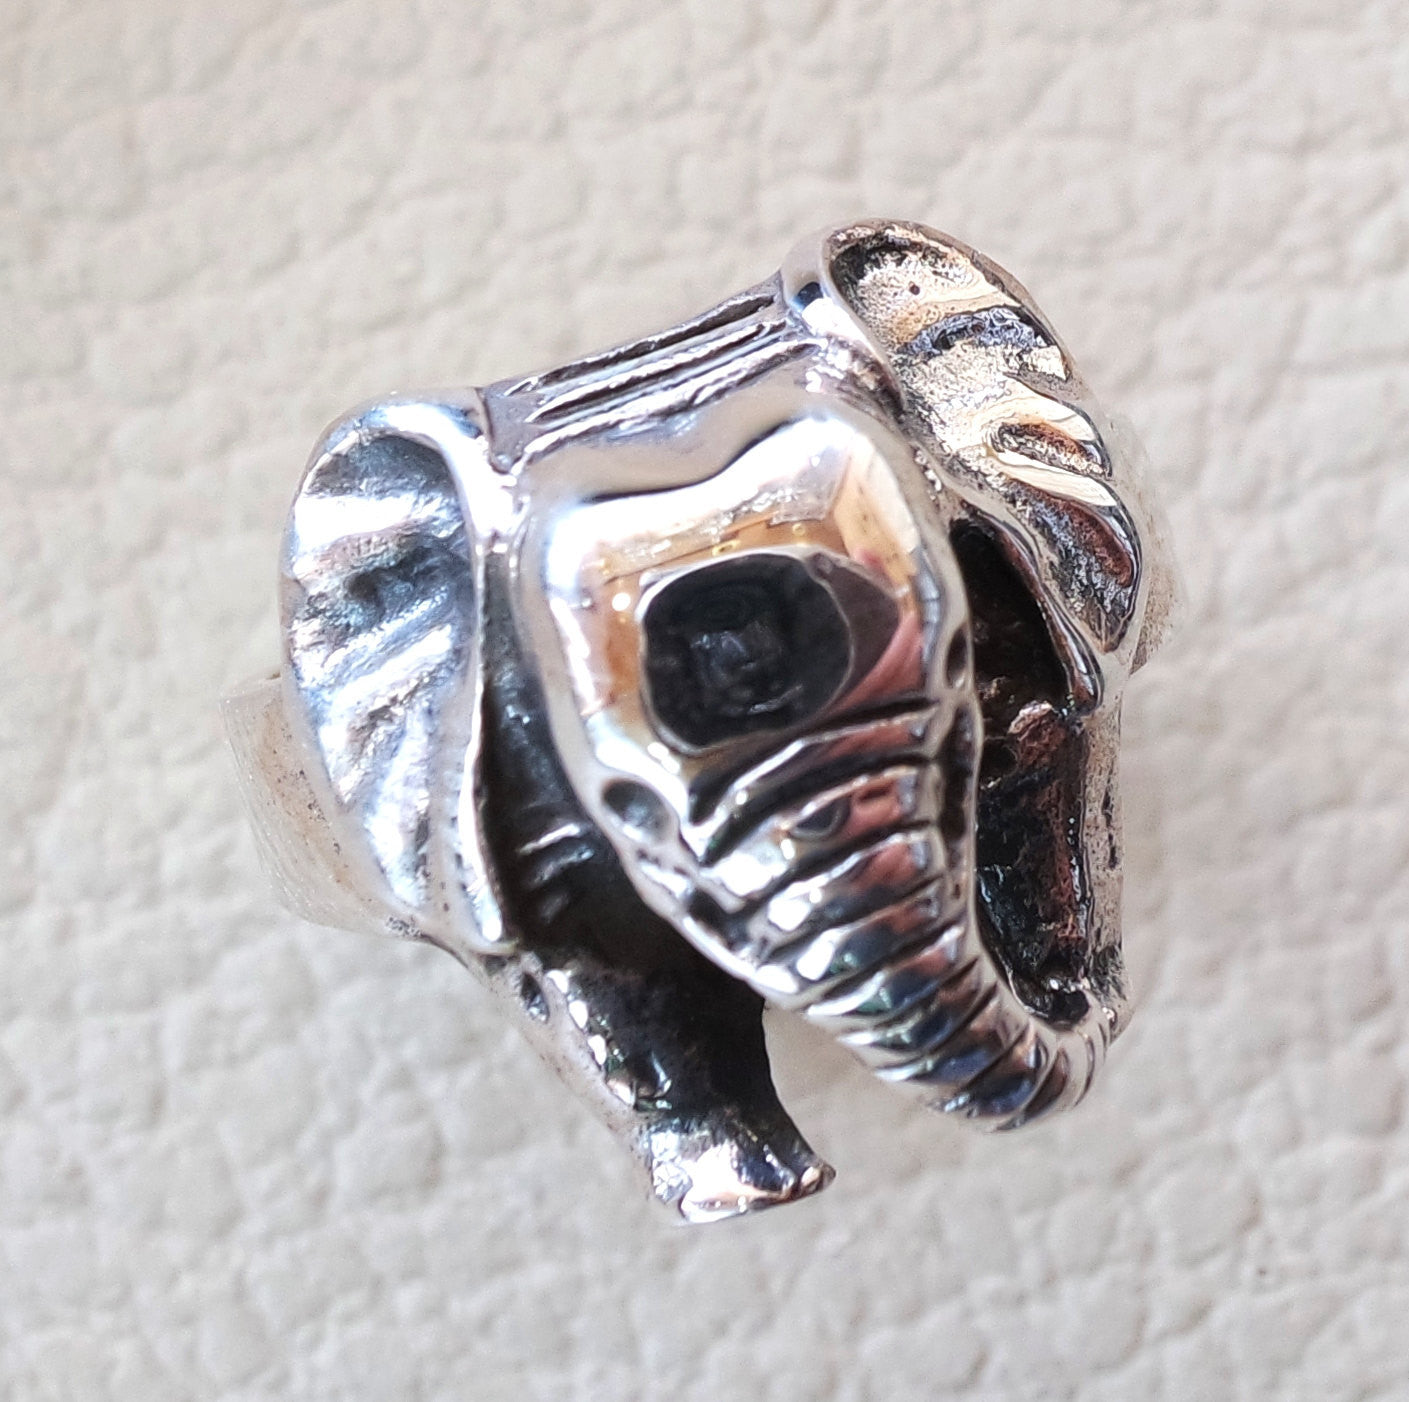 elephant pinkie ring sterling silver 925 man biker ring all sizes handmade animal jewelry fast shipping detailed craftsmanship